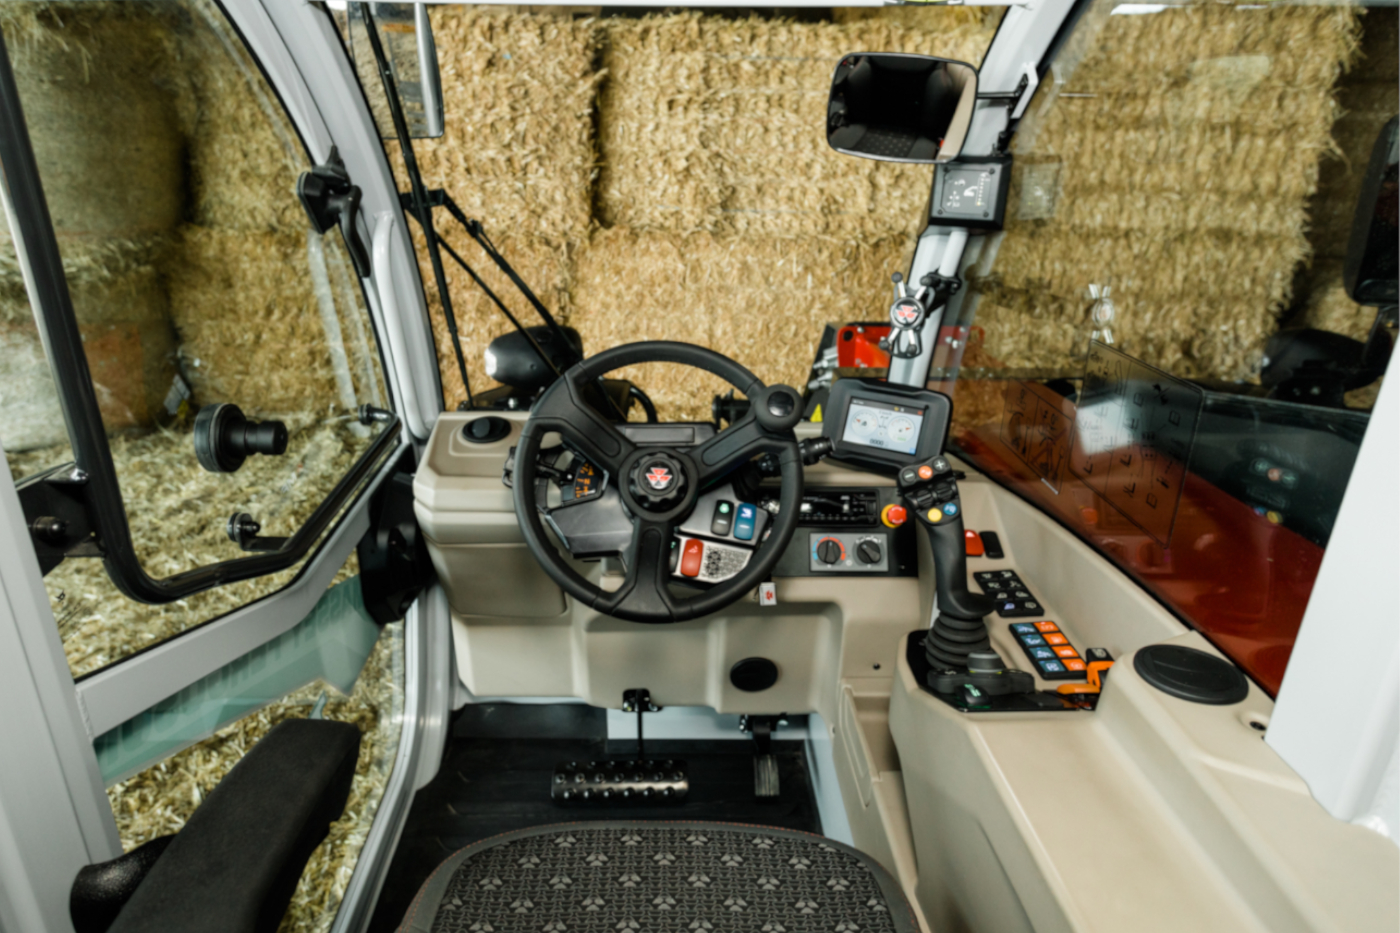 Quiet new cab offers outstanding comfort and visibility